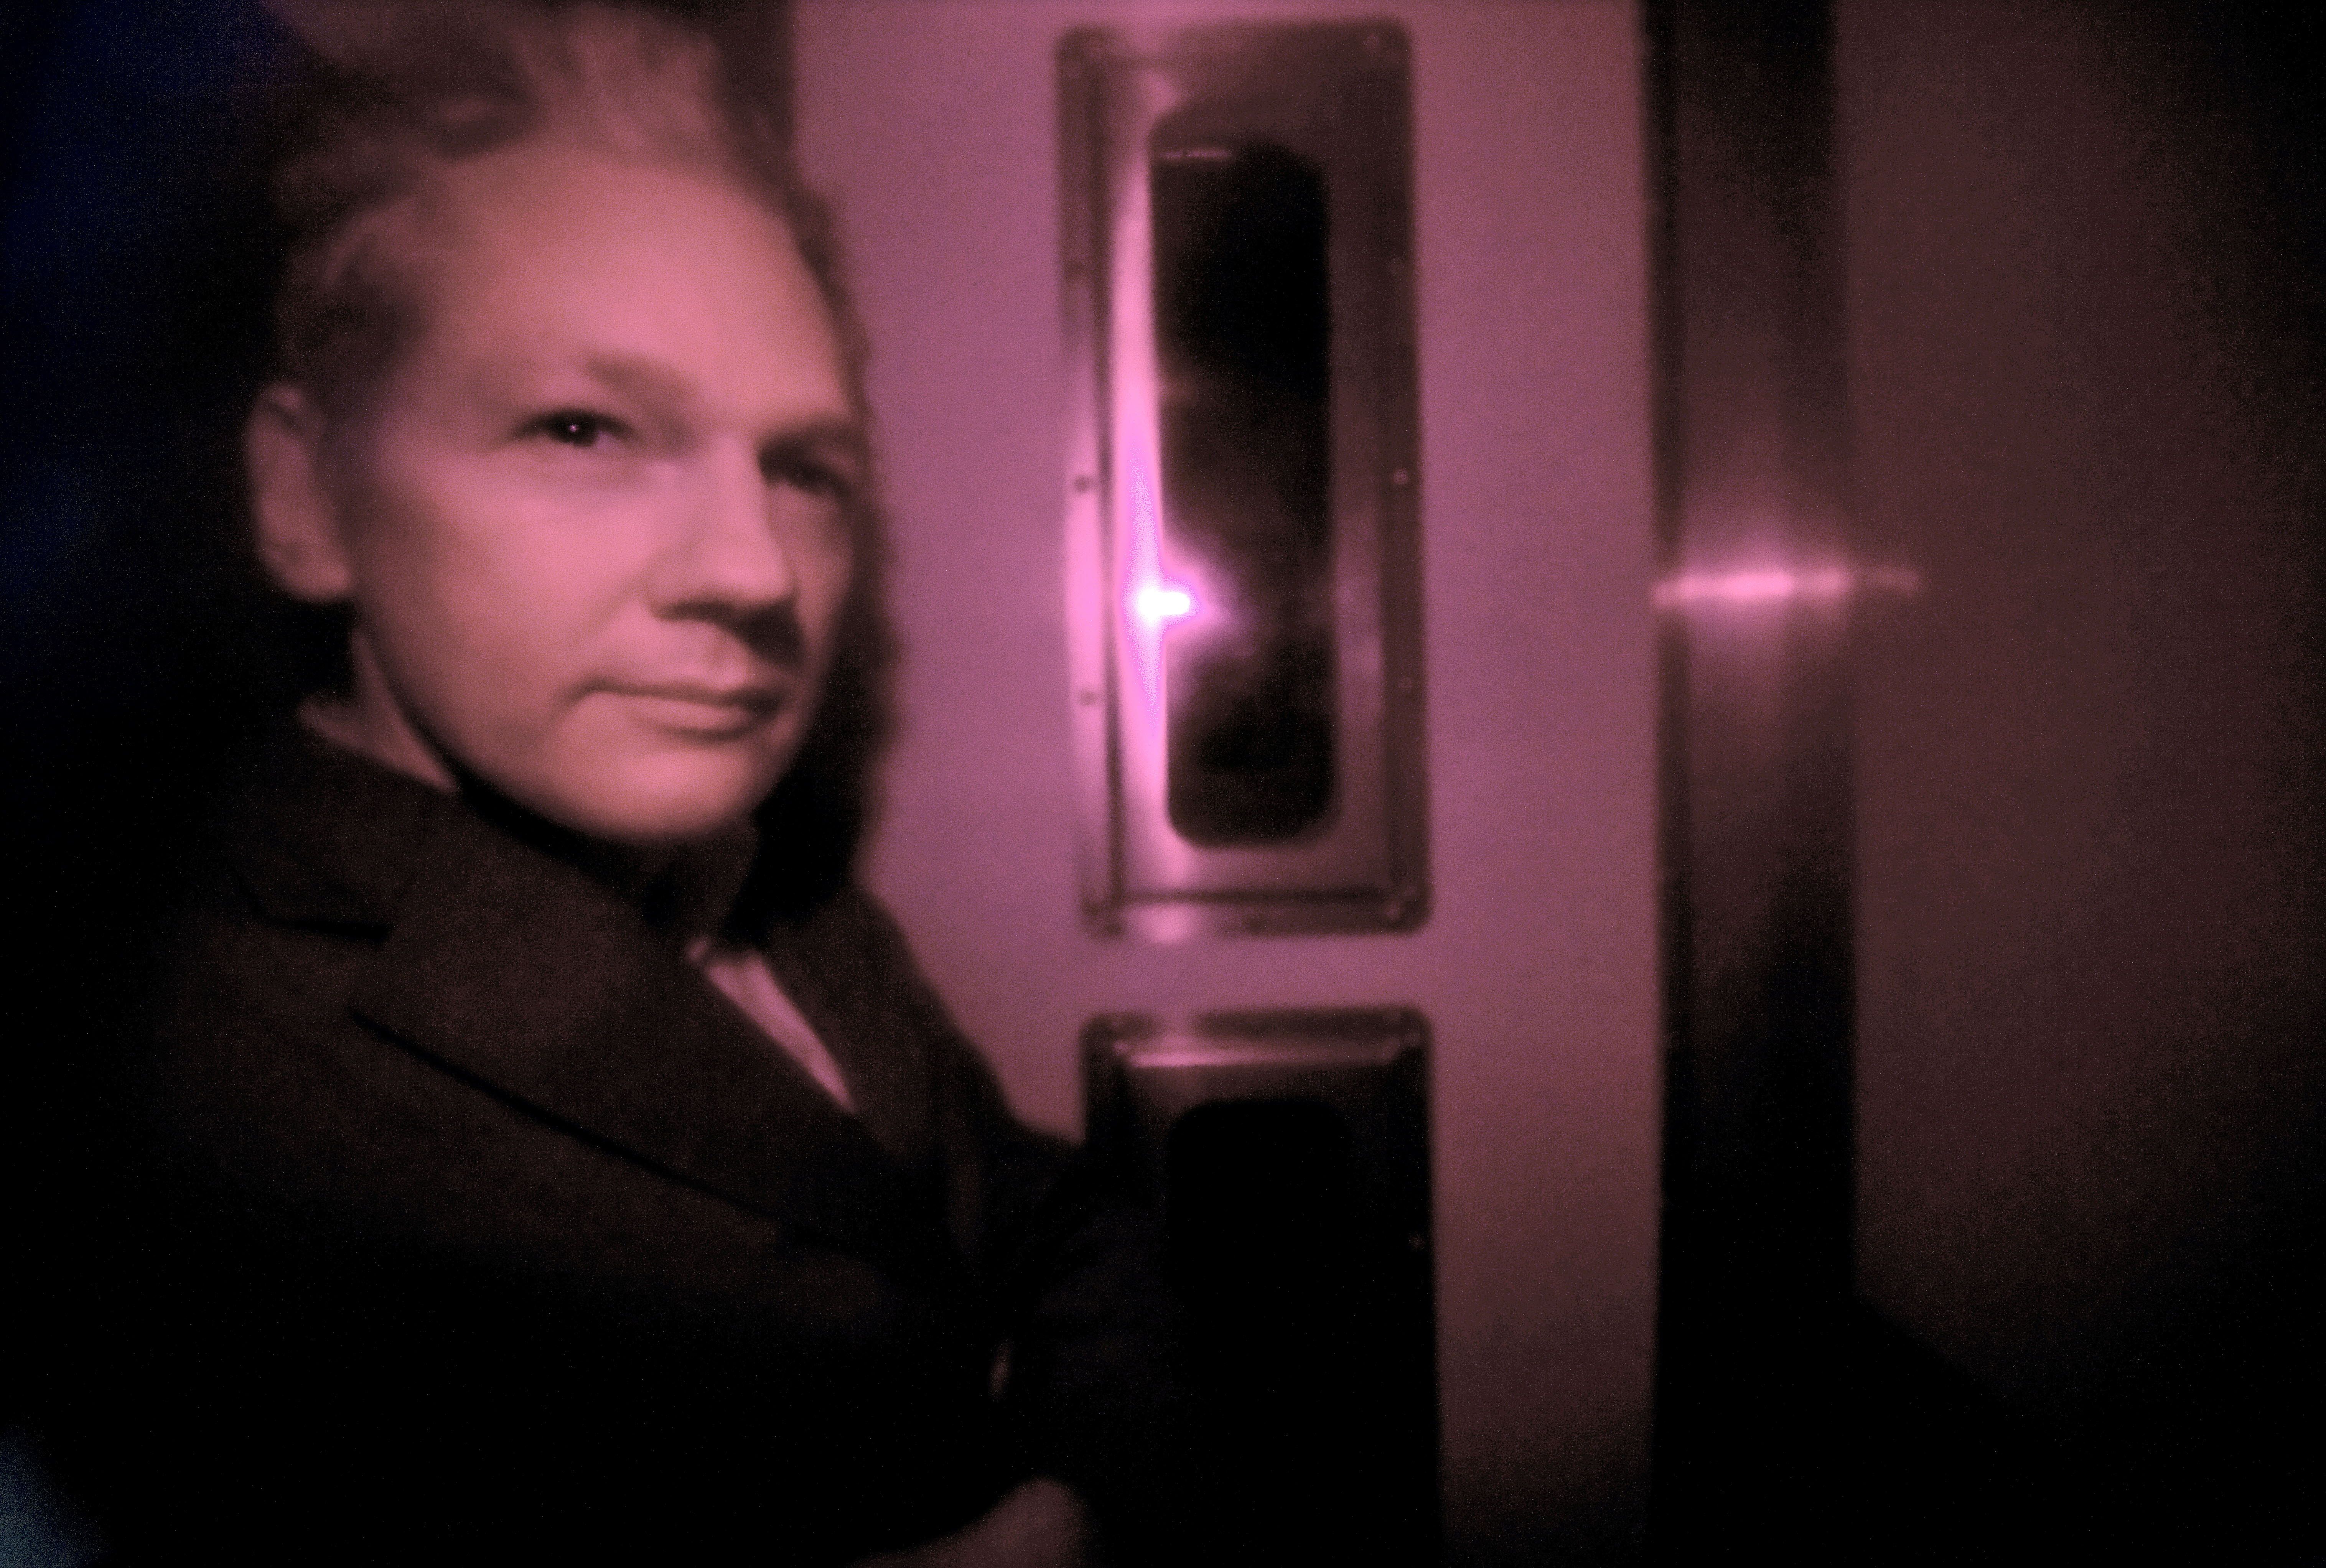 Wikileaks founder Julian Assange is pictured through the heavily tinted windows of a police vehicle as he arrives at Westminster magistrates court in London, on December 14, 2010